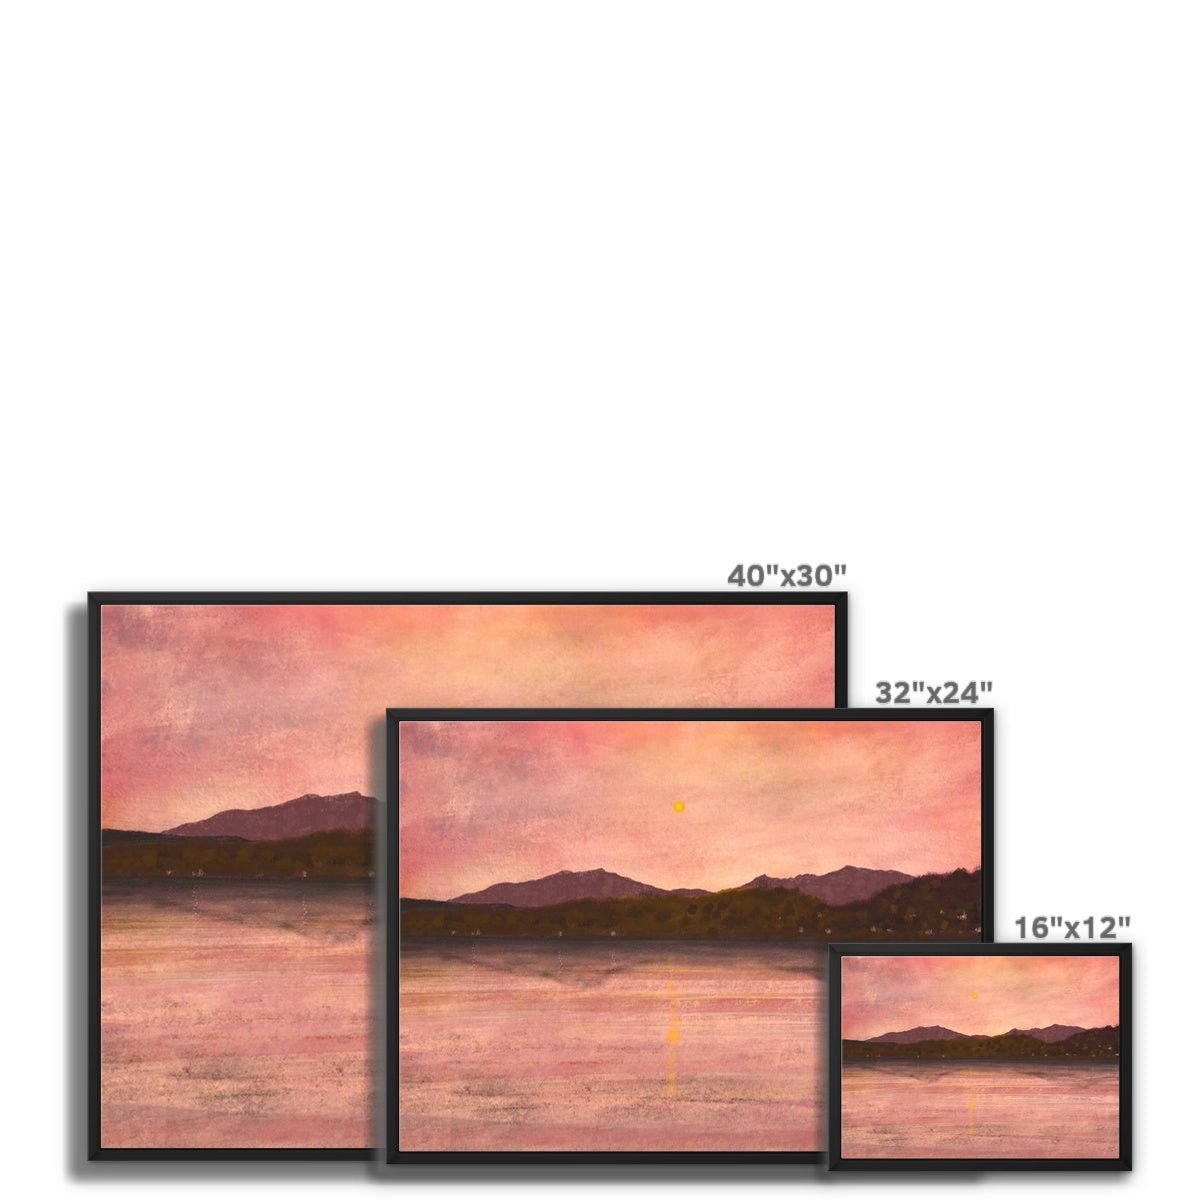 Dusk Over Arran & Bute Painting | Framed Canvas From Scotland-Floating Framed Canvas Prints-Arran Art Gallery-Paintings, Prints, Homeware, Art Gifts From Scotland By Scottish Artist Kevin Hunter